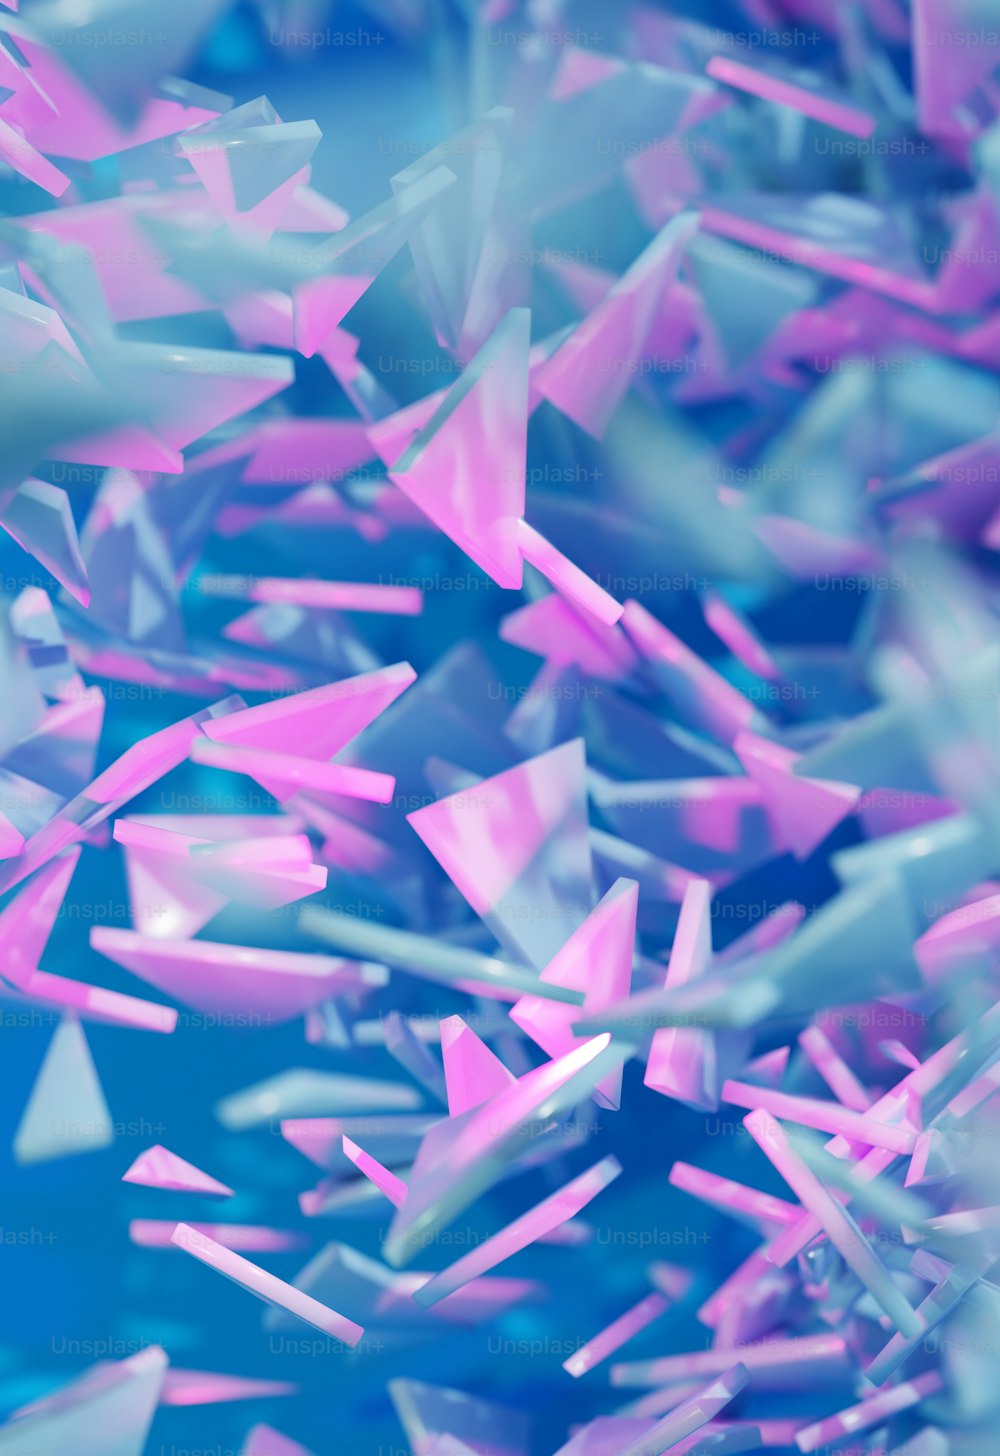 a bunch of pink and blue objects flying in the air